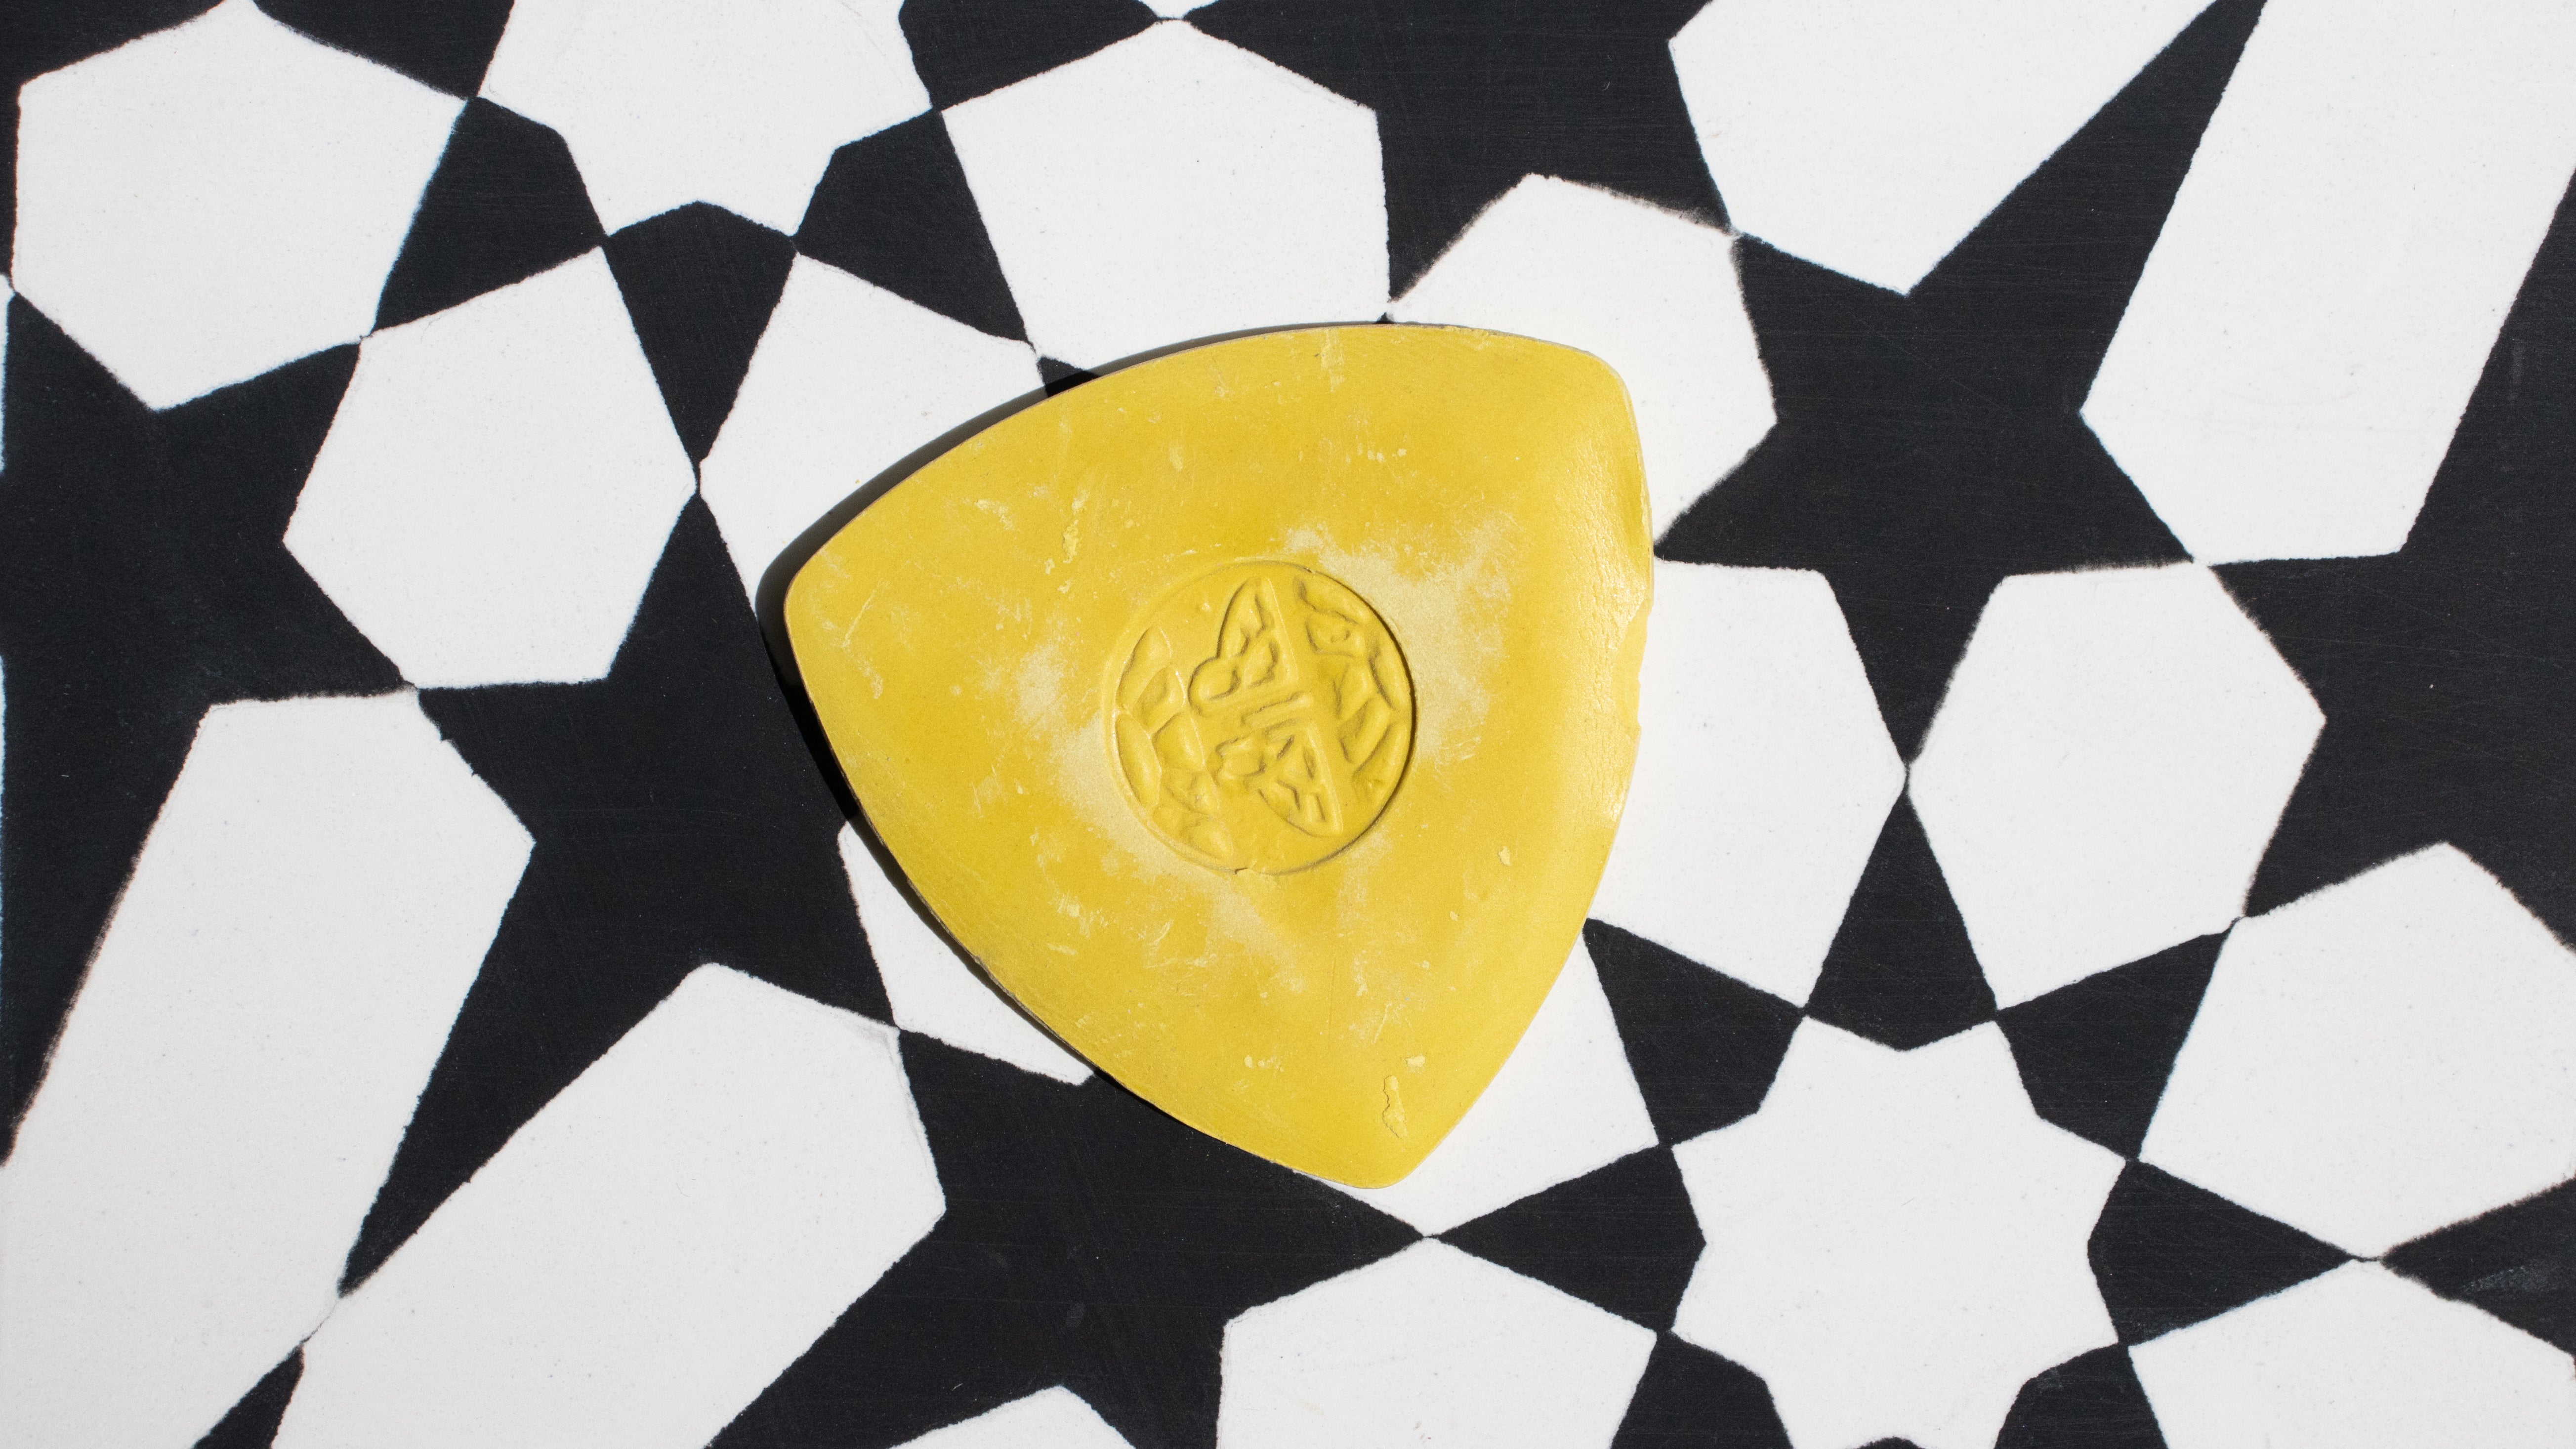 Triangle Tailor's Chalk (Yellow)